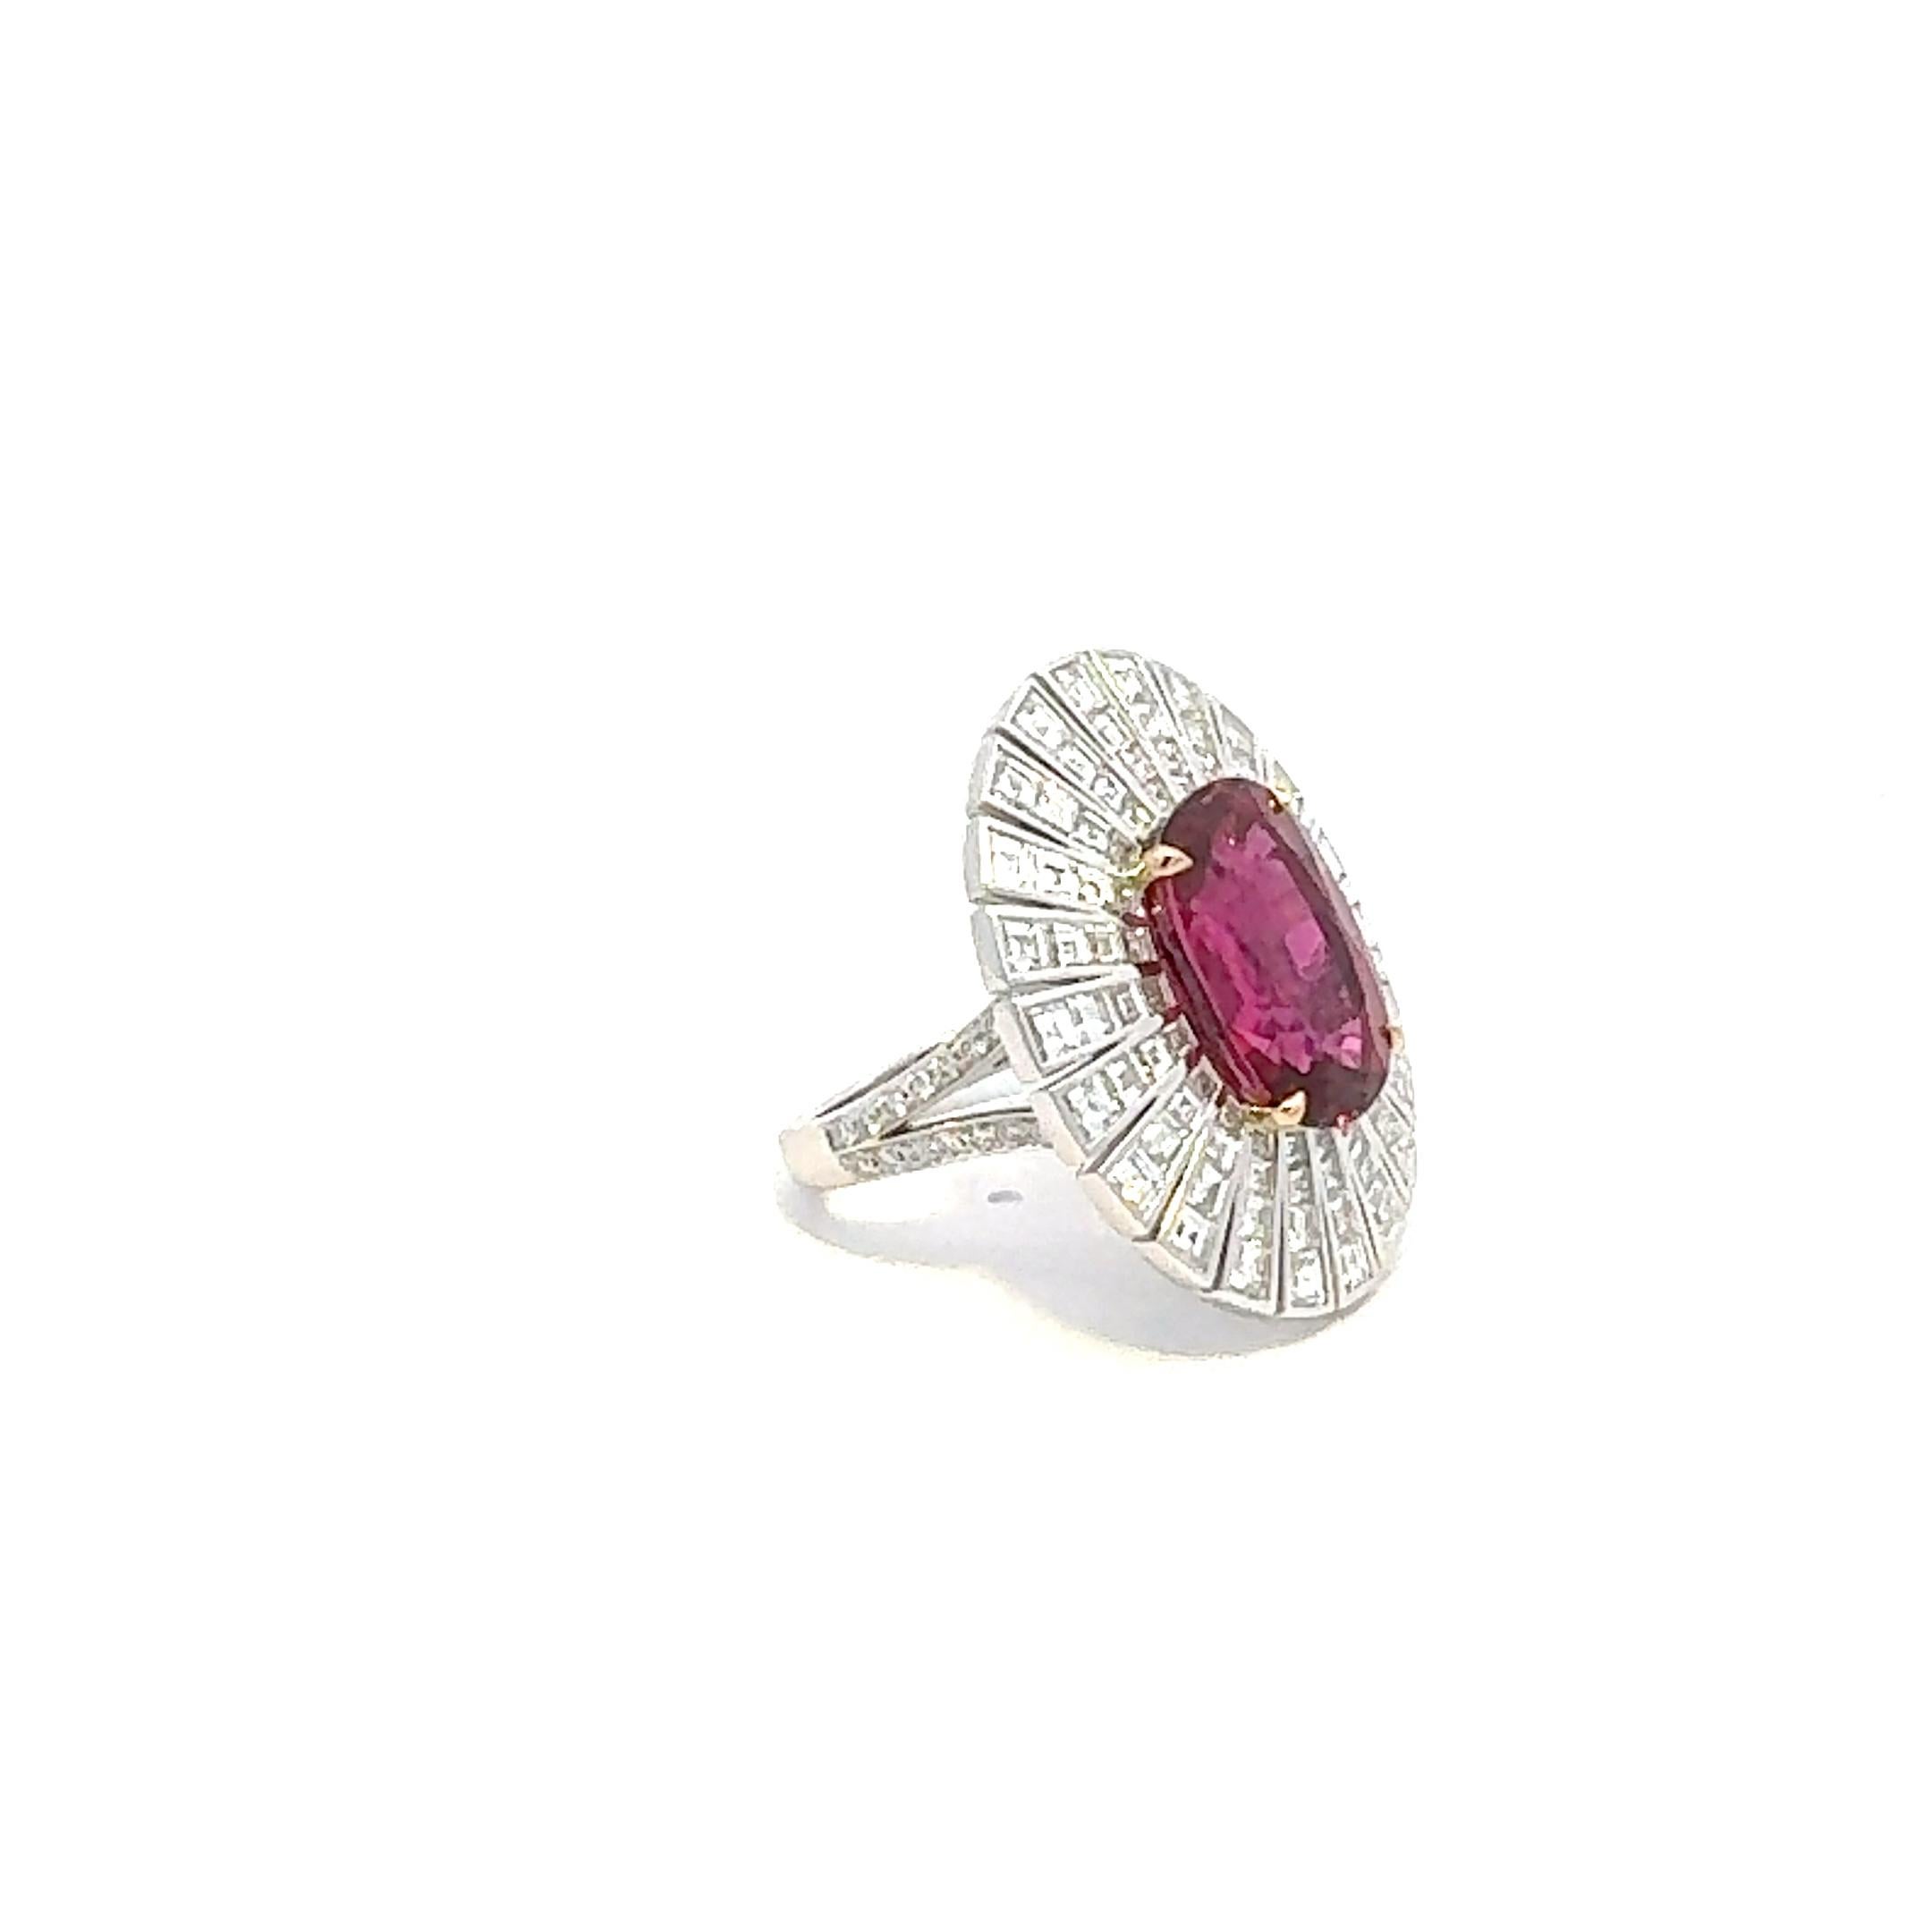 Ring

18K White Gold

Diamond 3.83 ct
Ruby 8.72 ct

Weight 11 grams

It is our honour to create fine jewelry, and it’s for that reason that we choose to only work with high-quality, enduring materials that can almost immediately turn into family